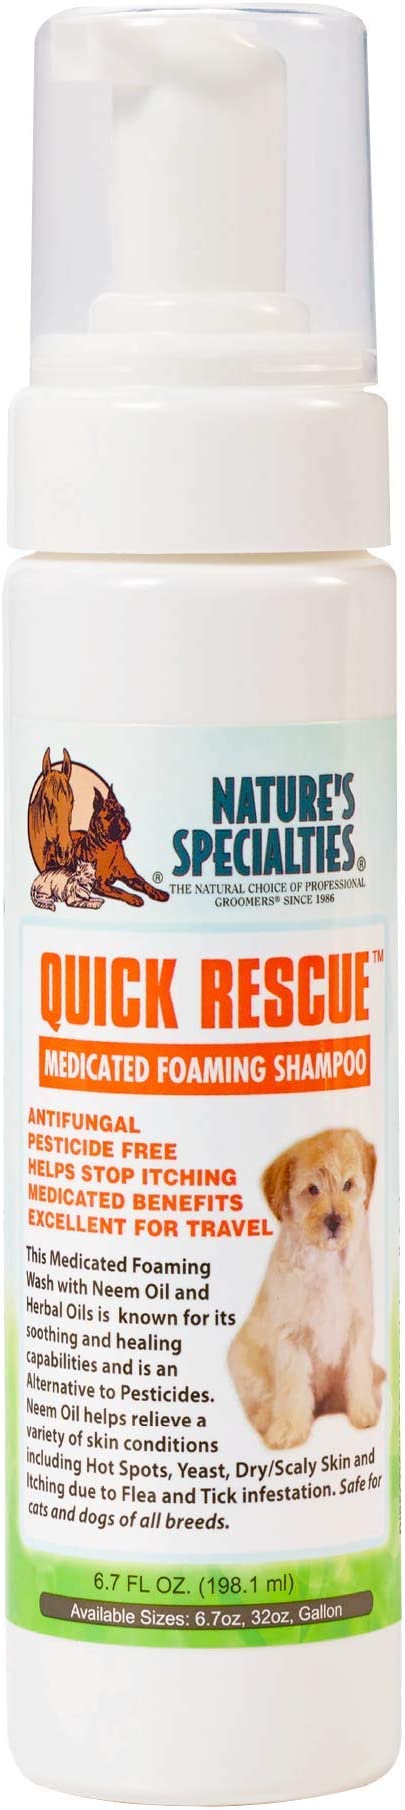 Nature's Specialties Quick Rescue Facial Wash for Dogs Cats, Non-Toxic Biodegradeable, 6.7oz